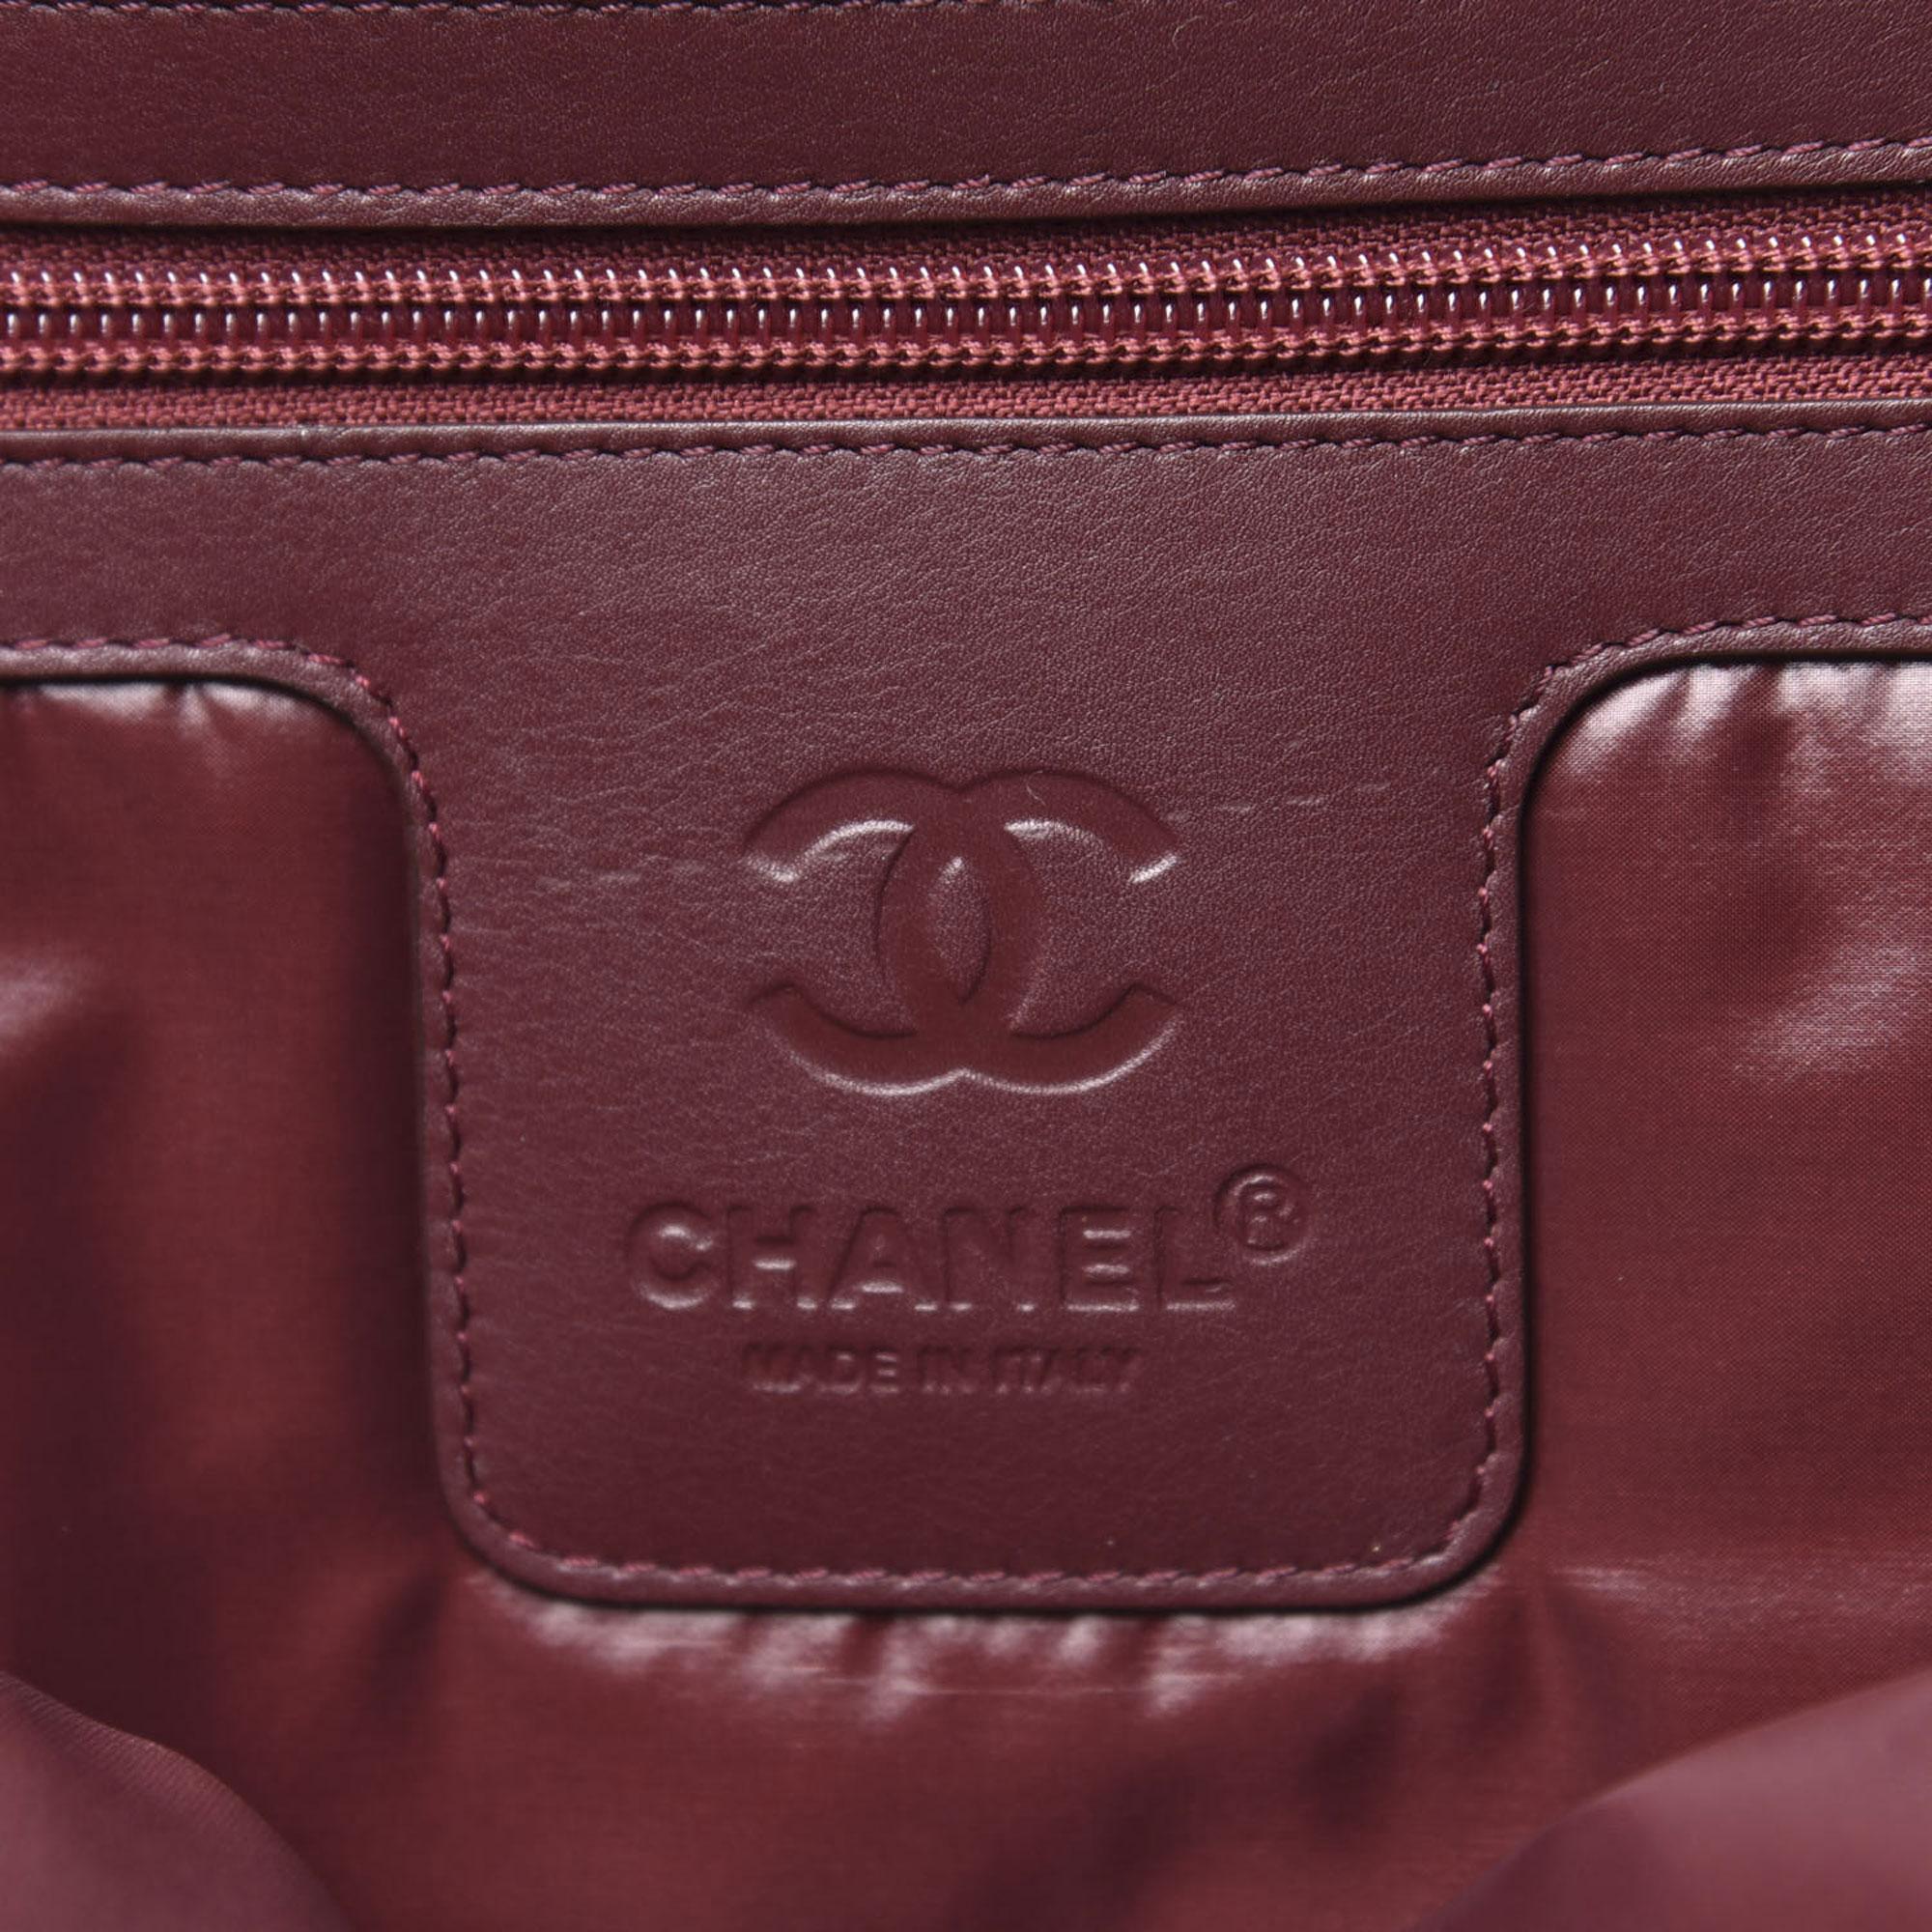 Chanel 2012 Coco Cocoon Quilted Case Carry On Trolley Travel Black Luggage Bag 8